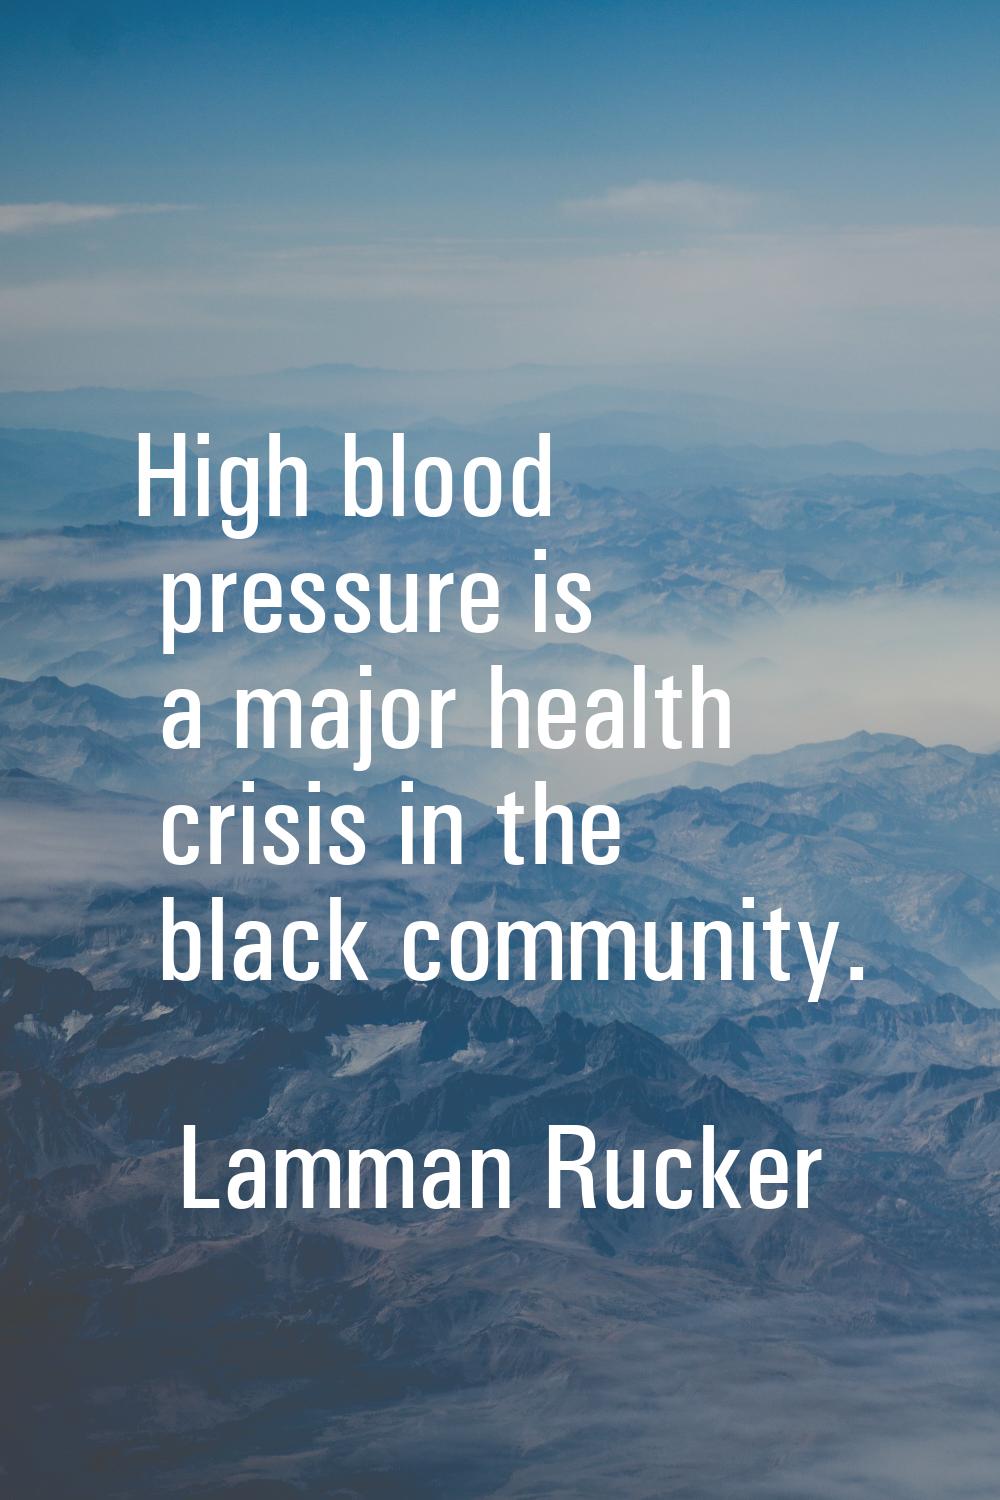 High blood pressure is a major health crisis in the black community.